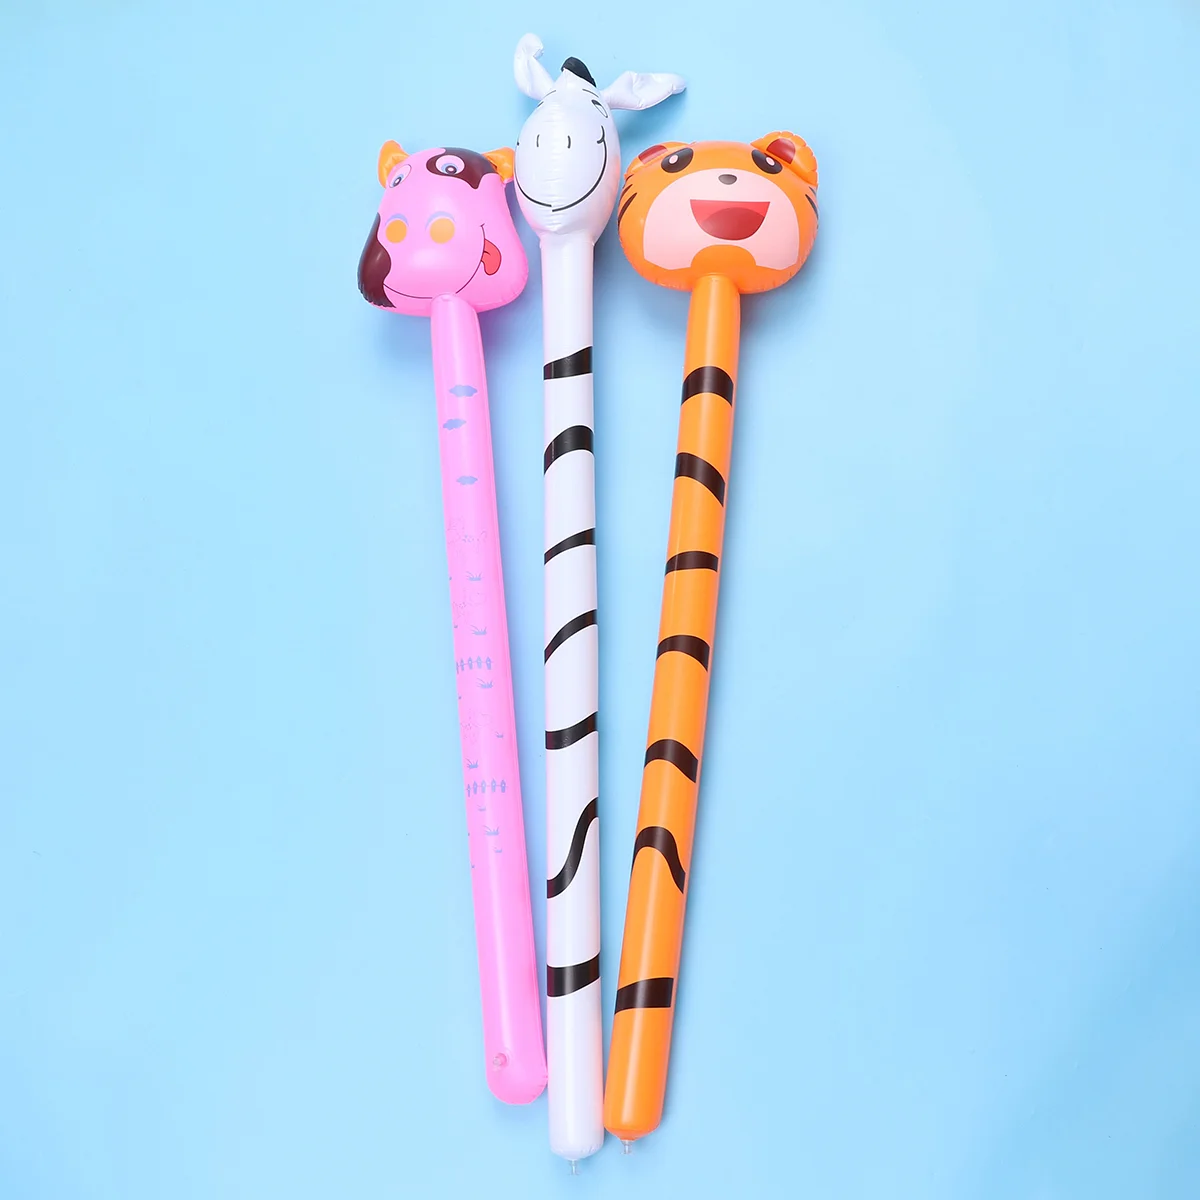 

6pcs Kids PVC Inflatable Animal Toy Funny Inflatable Toy Playing Long Stick Toy (Mixed Style)